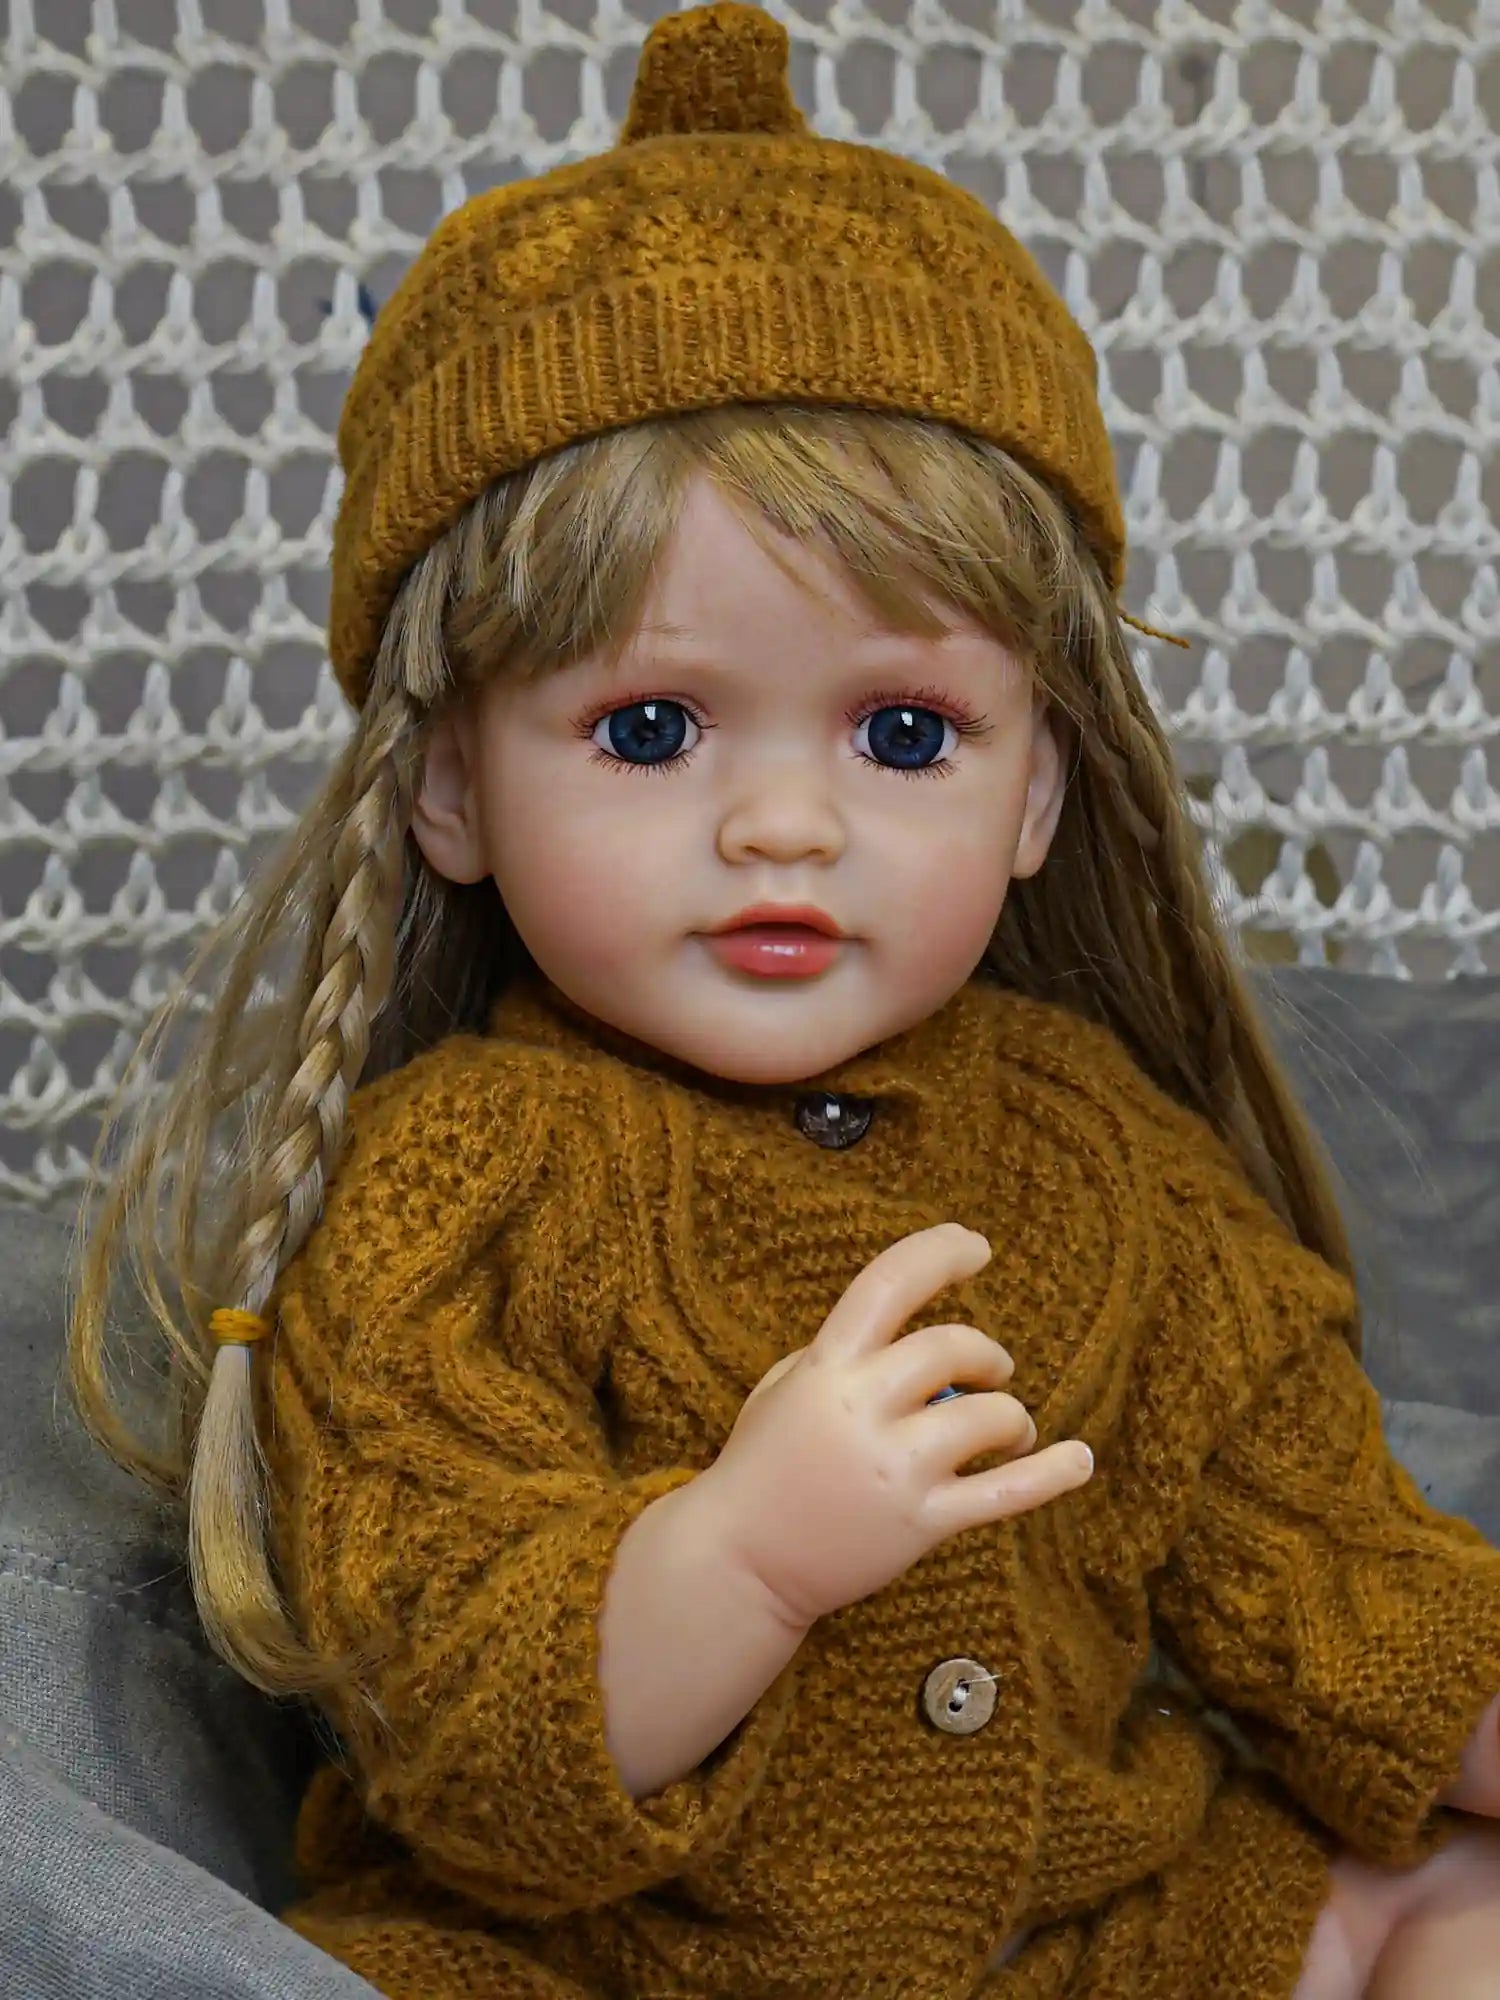 Reborn doll with an intricate facial expression, adorned in a cozy mustard-colored knitted outfit with a matching beanie, set against a textured grey cloth and lace background.